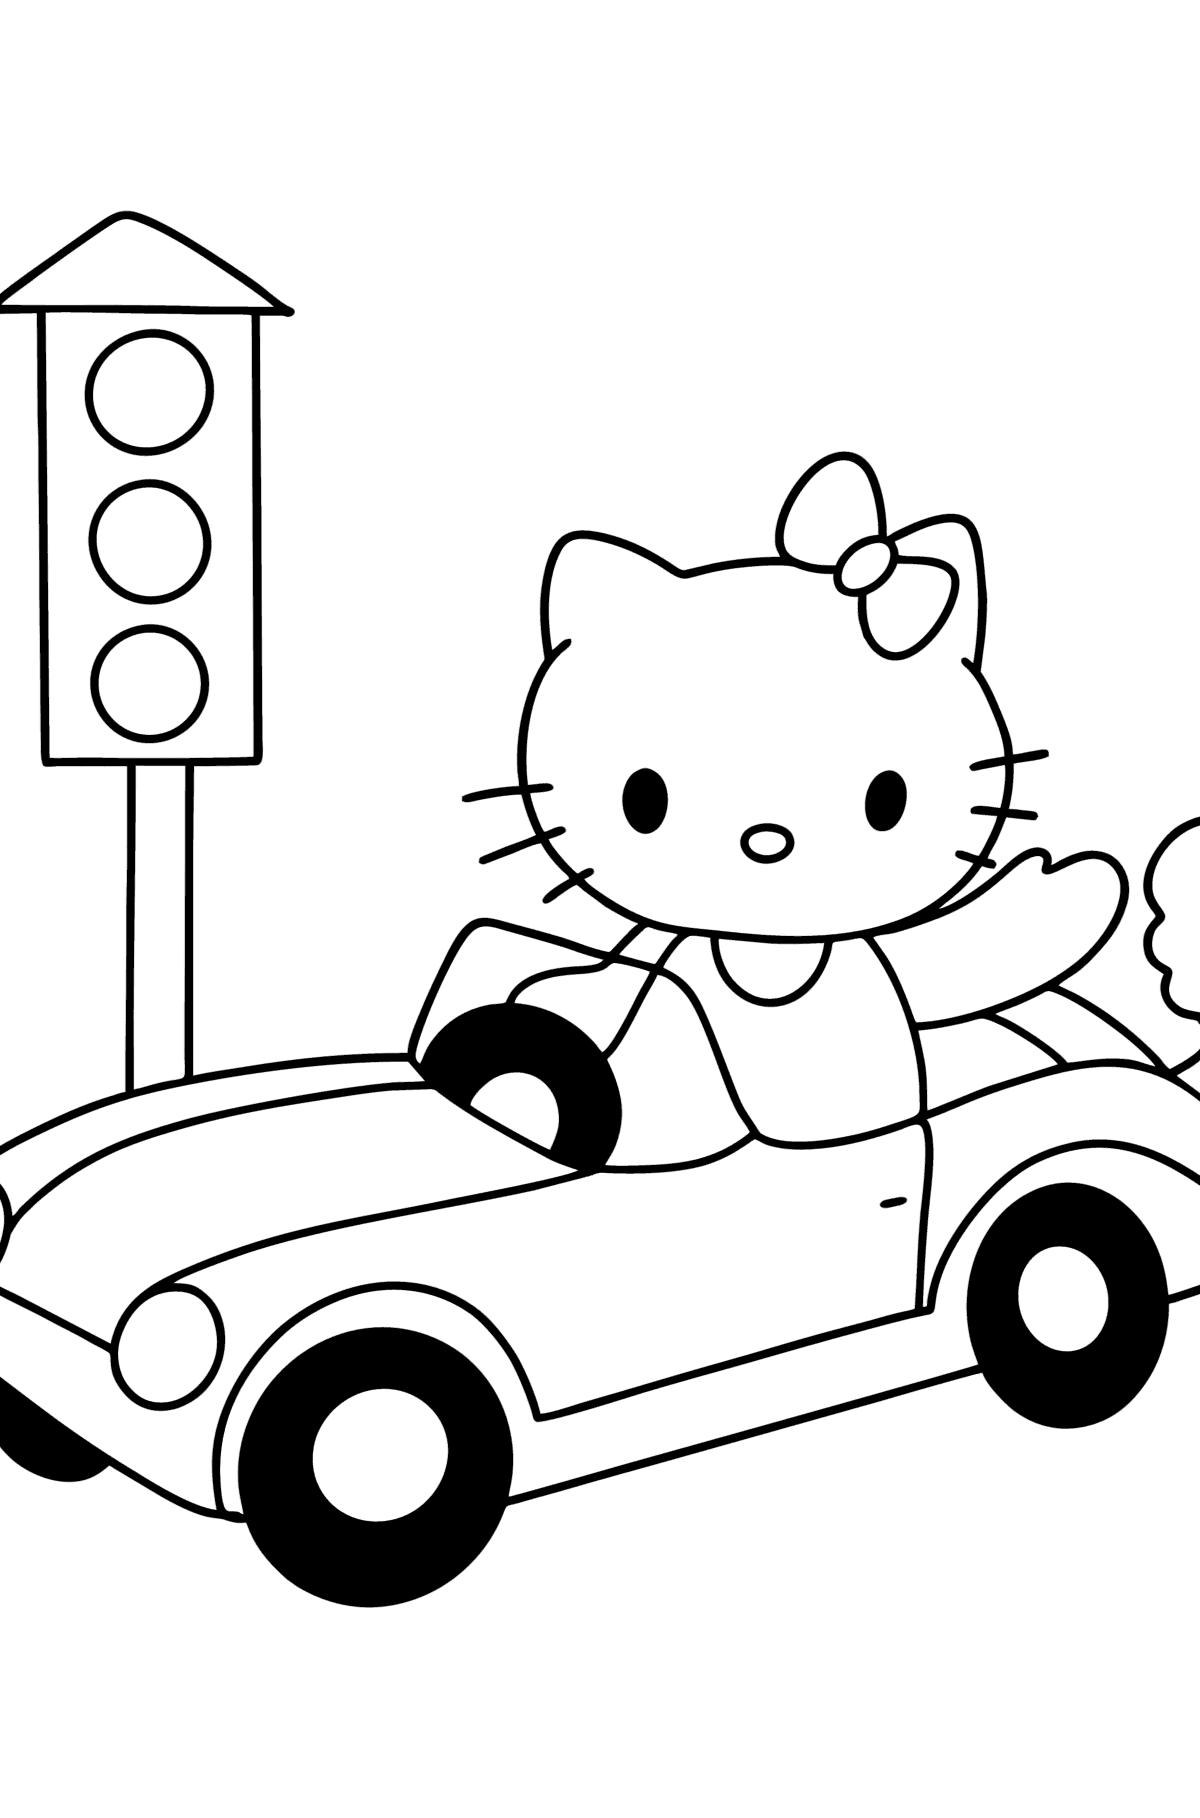 Hello Kitty by car coloring page - Coloring Pages for Kids